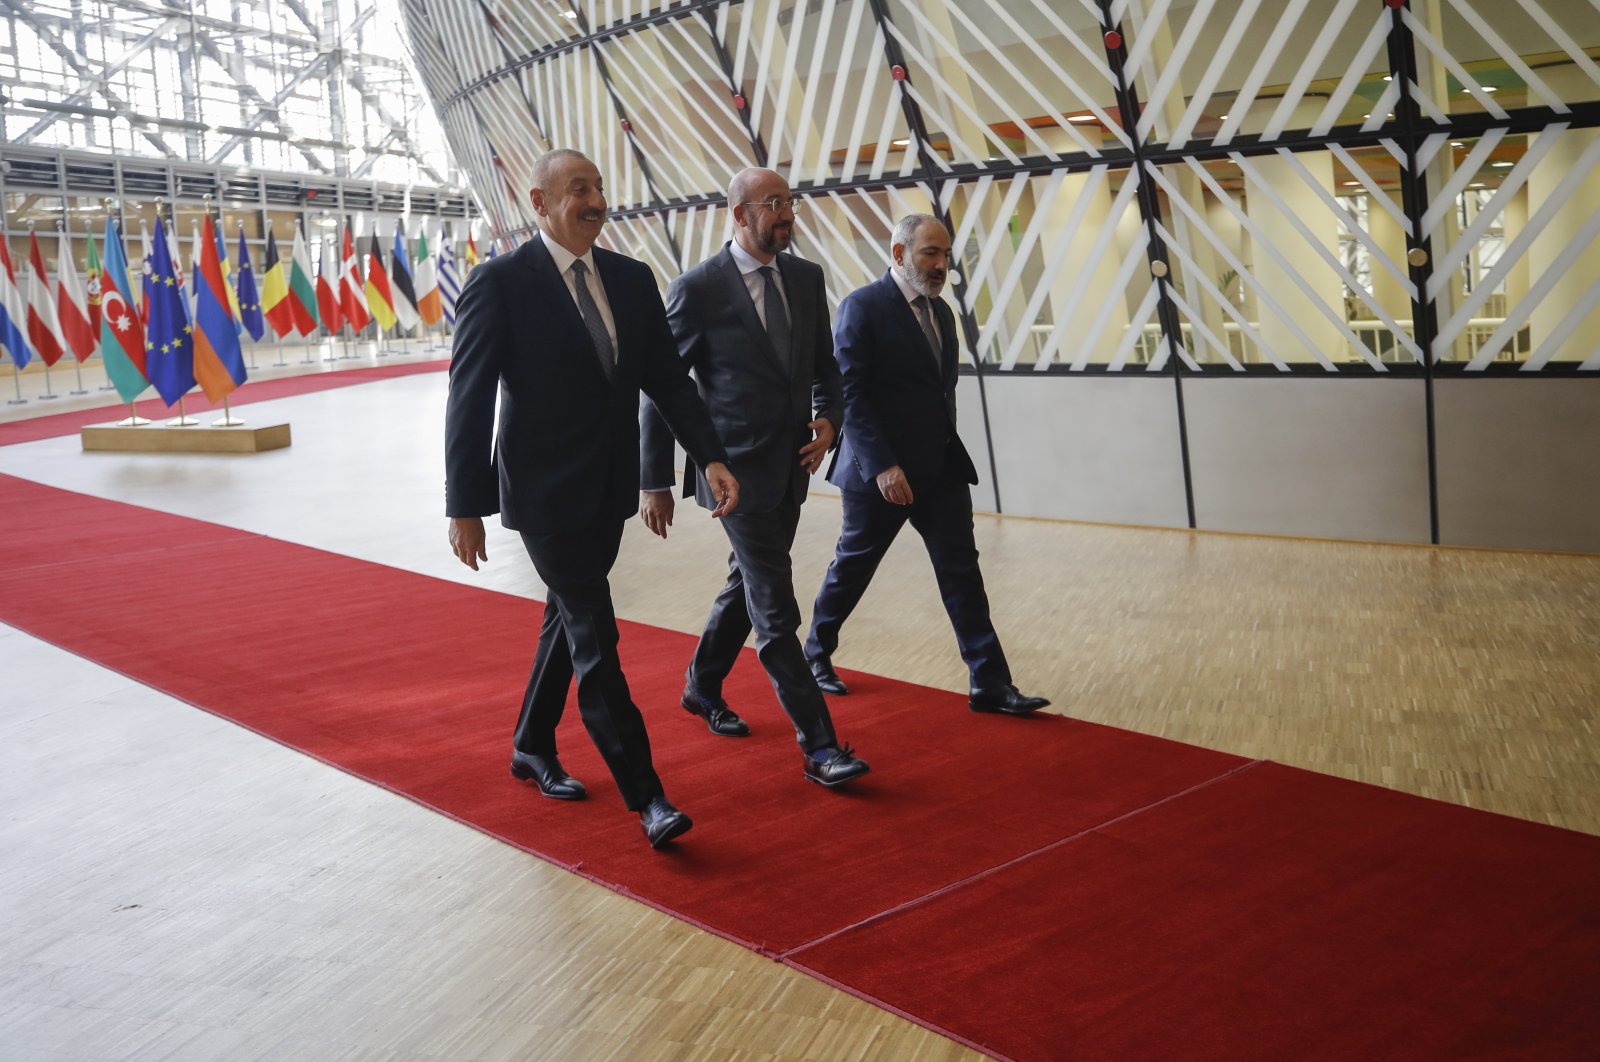 Azerbaijan&#039;s President Ilham Aliyev (L) and Armenia&#039;s Prime Minister Nikol Pashinian are welcomed by European Council President Charles Michel (C) in Brussels, Belgium, Aug. 31, 2022. (EPA Photo)